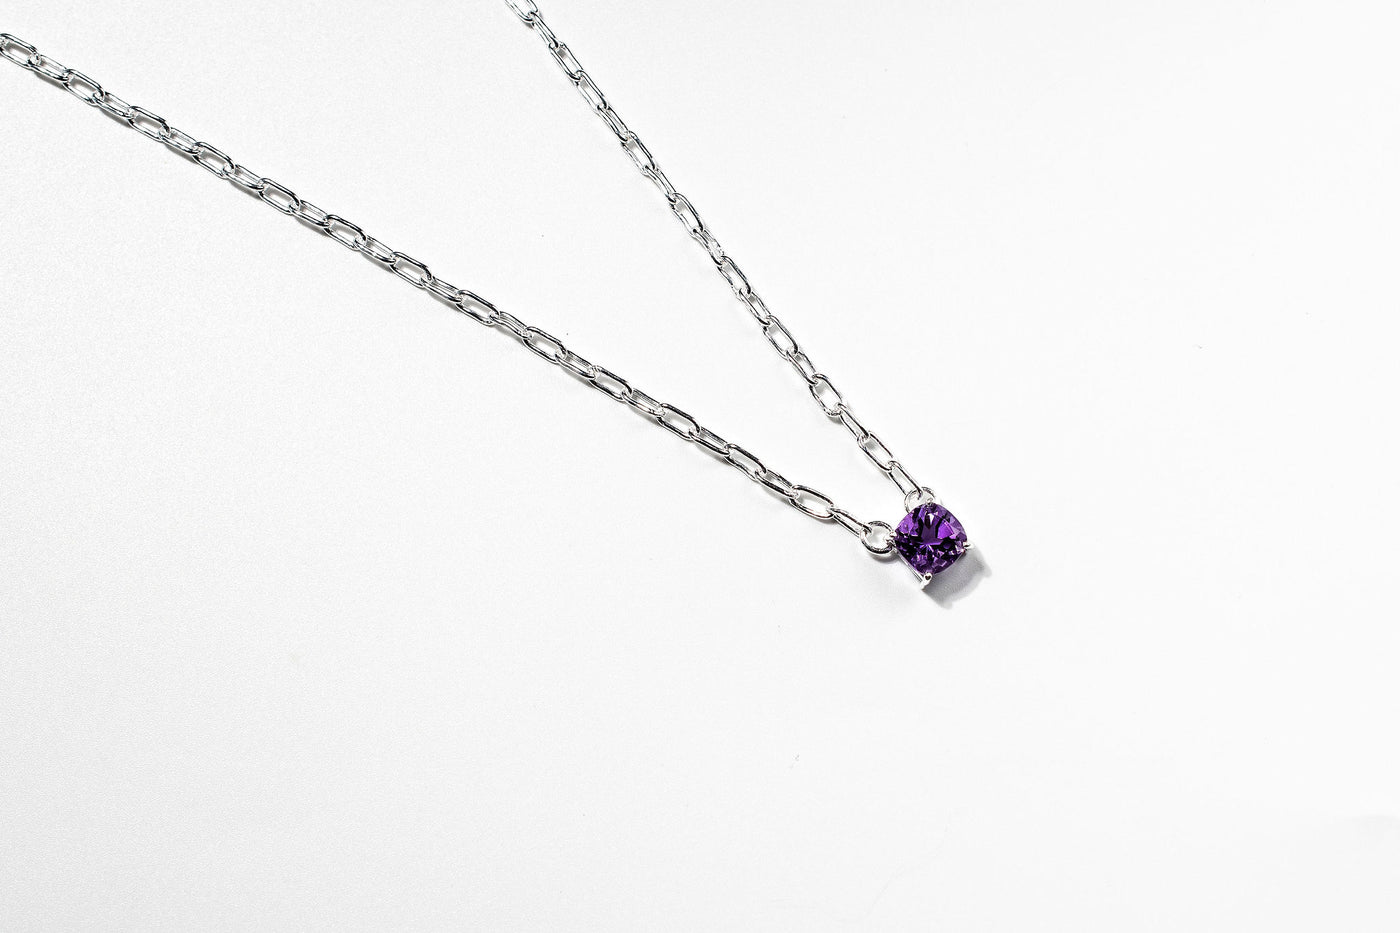 1ct Purple Amethyst Paperclip Necklace: Sterling Silver Adjustable